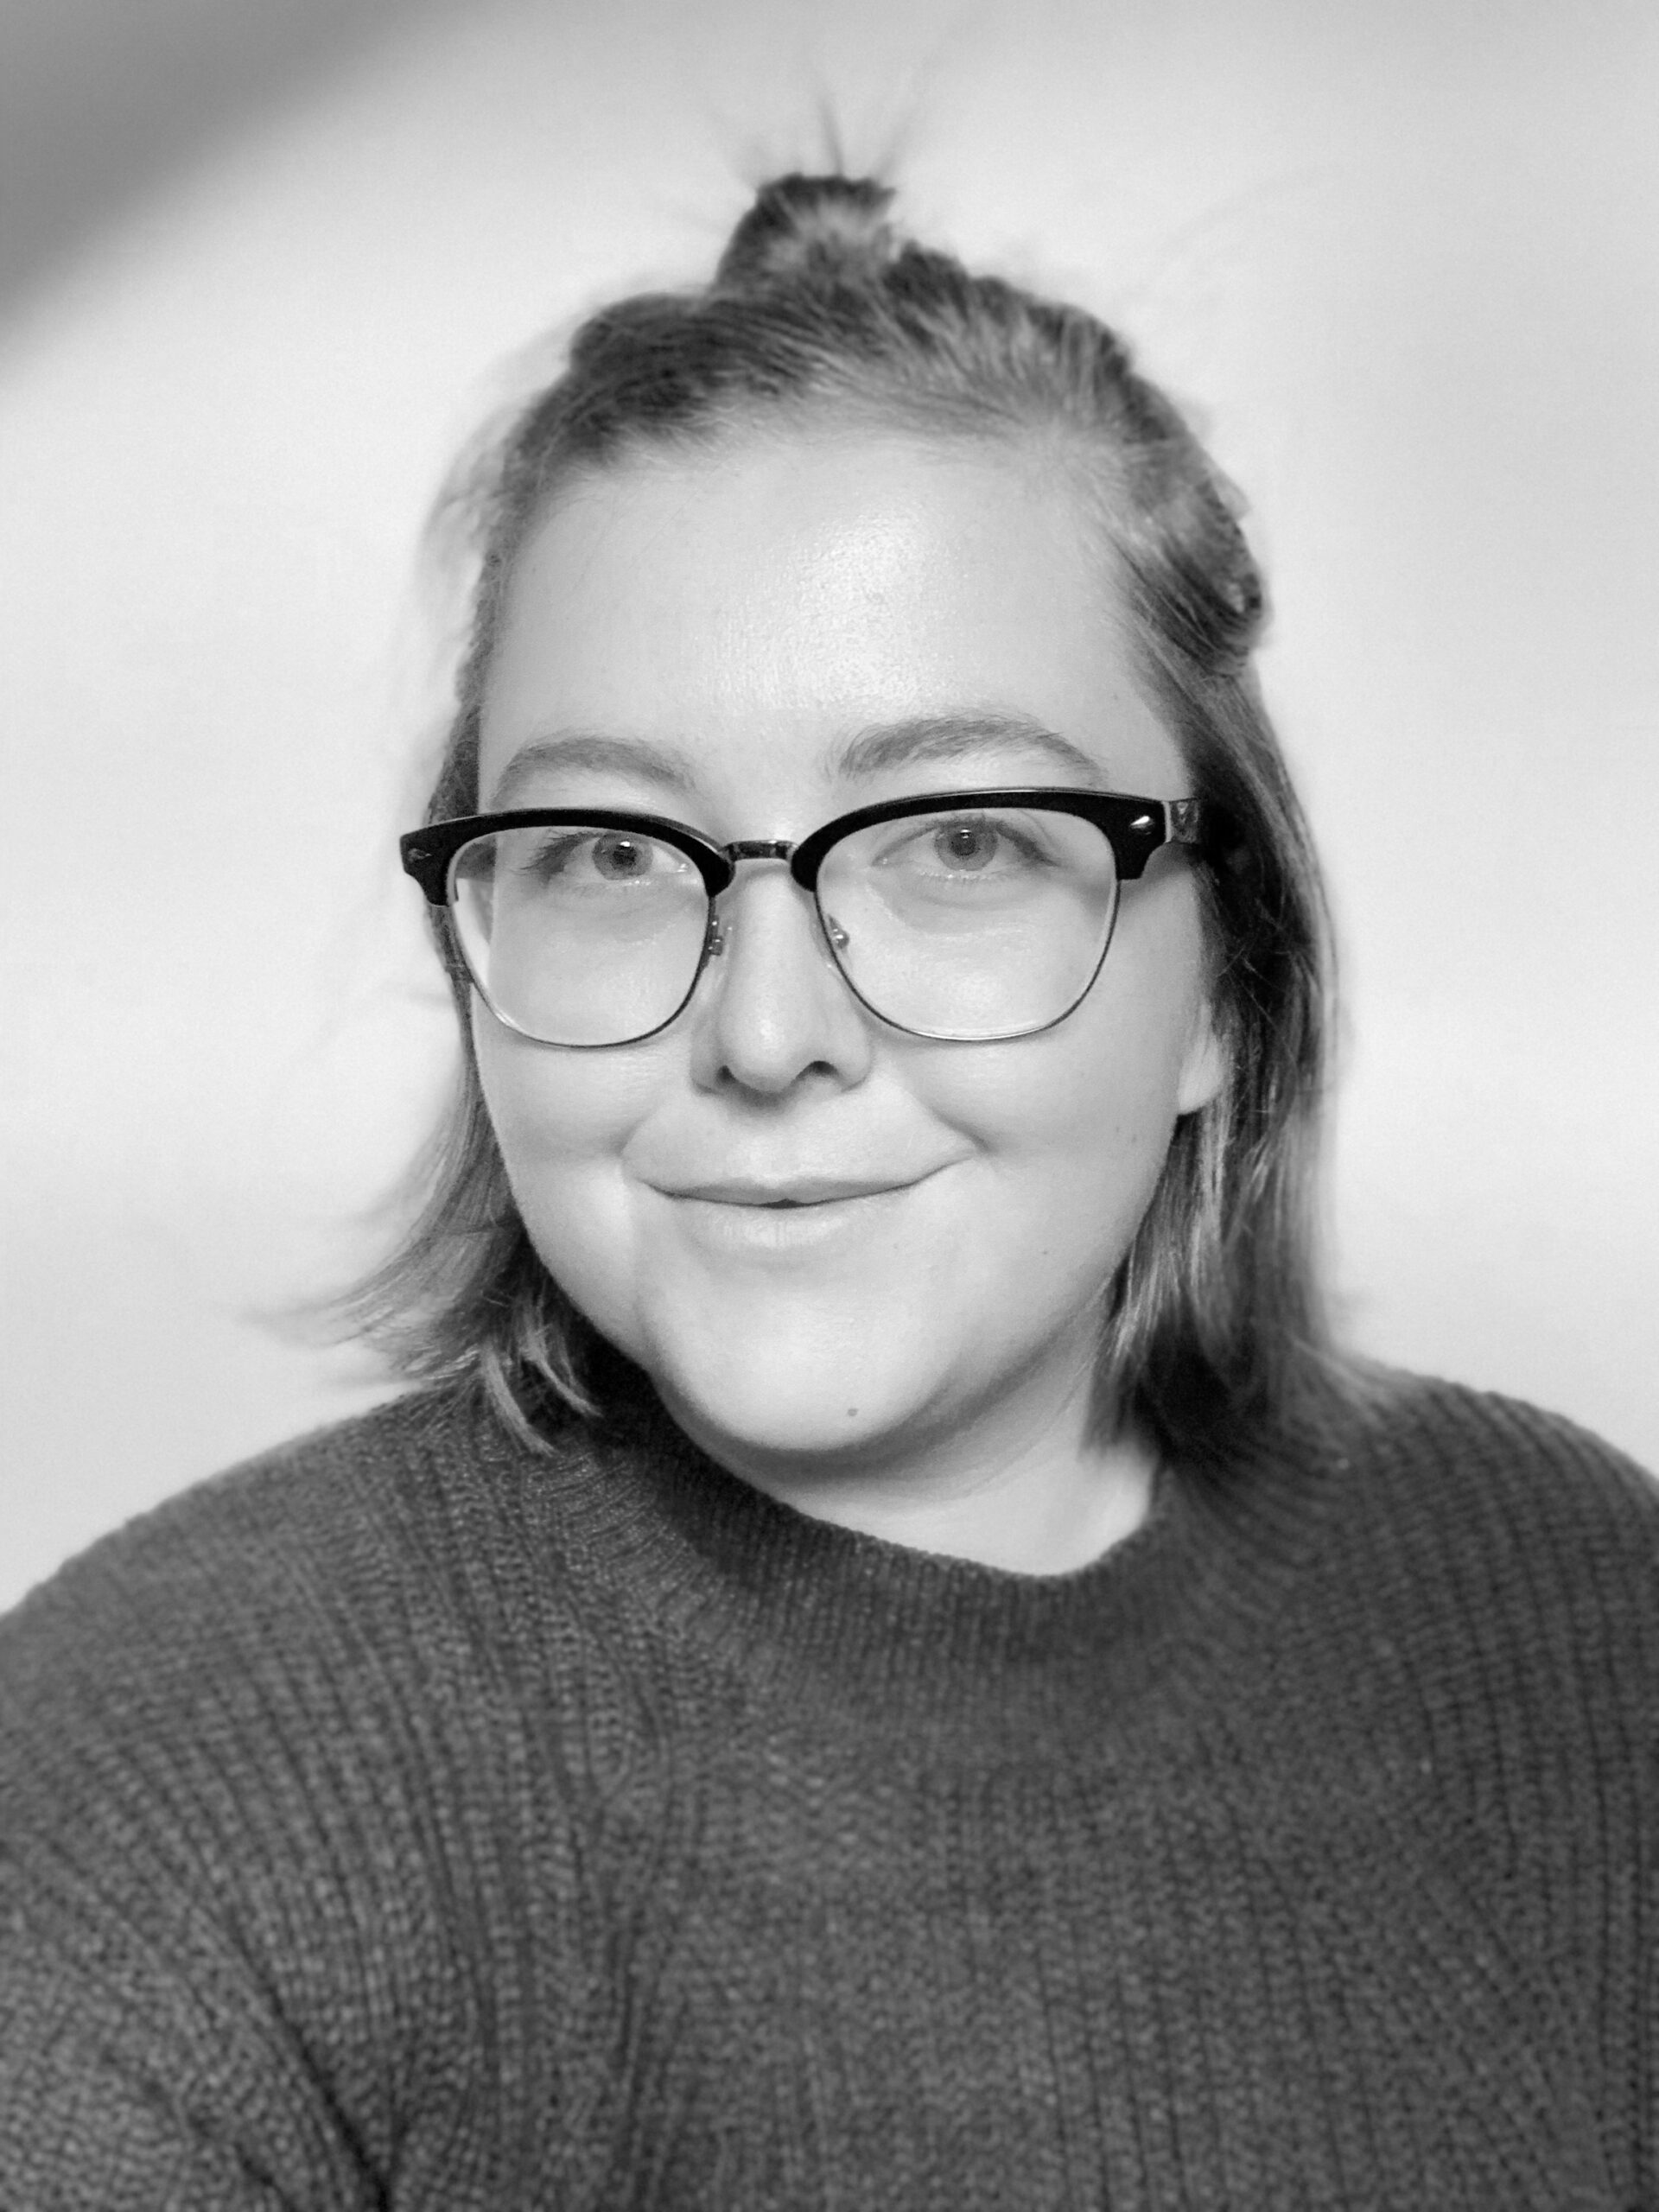 A black and white photo of a woman wearing glasses.